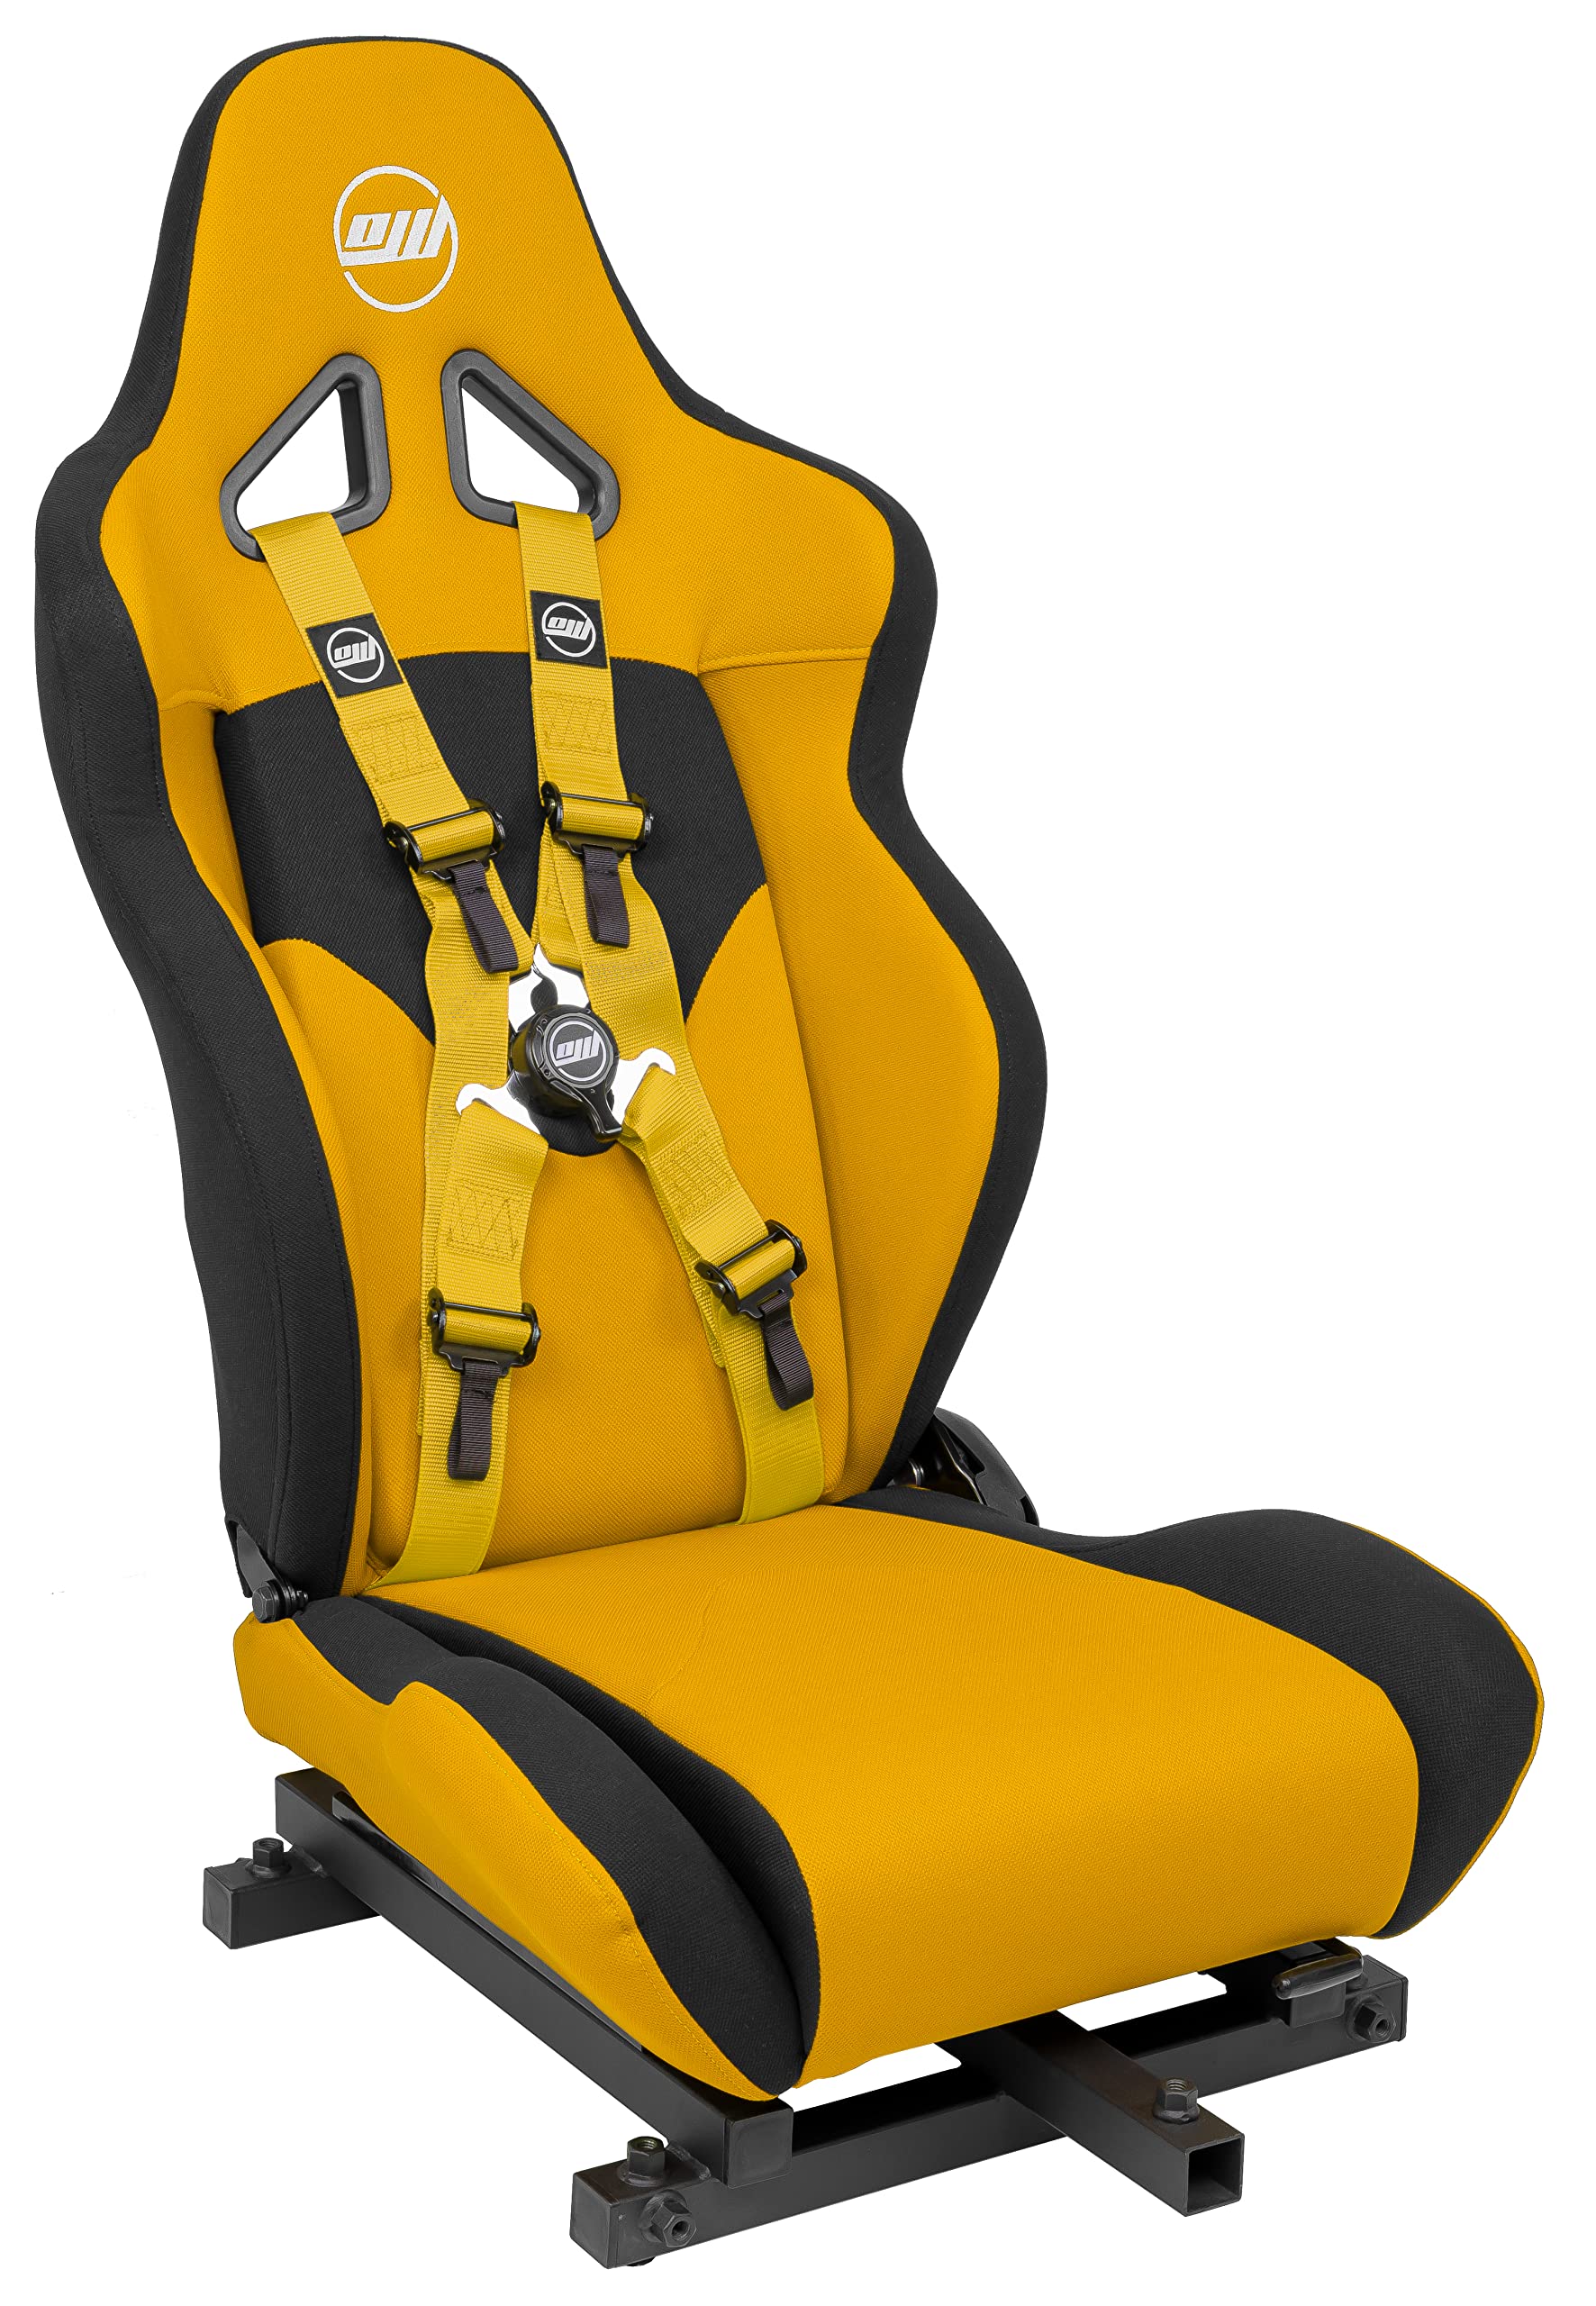 OpenWheeler Racing and Flight Simulation Cockpit Four Point Harness. Virtual Reality add-on. Yellow